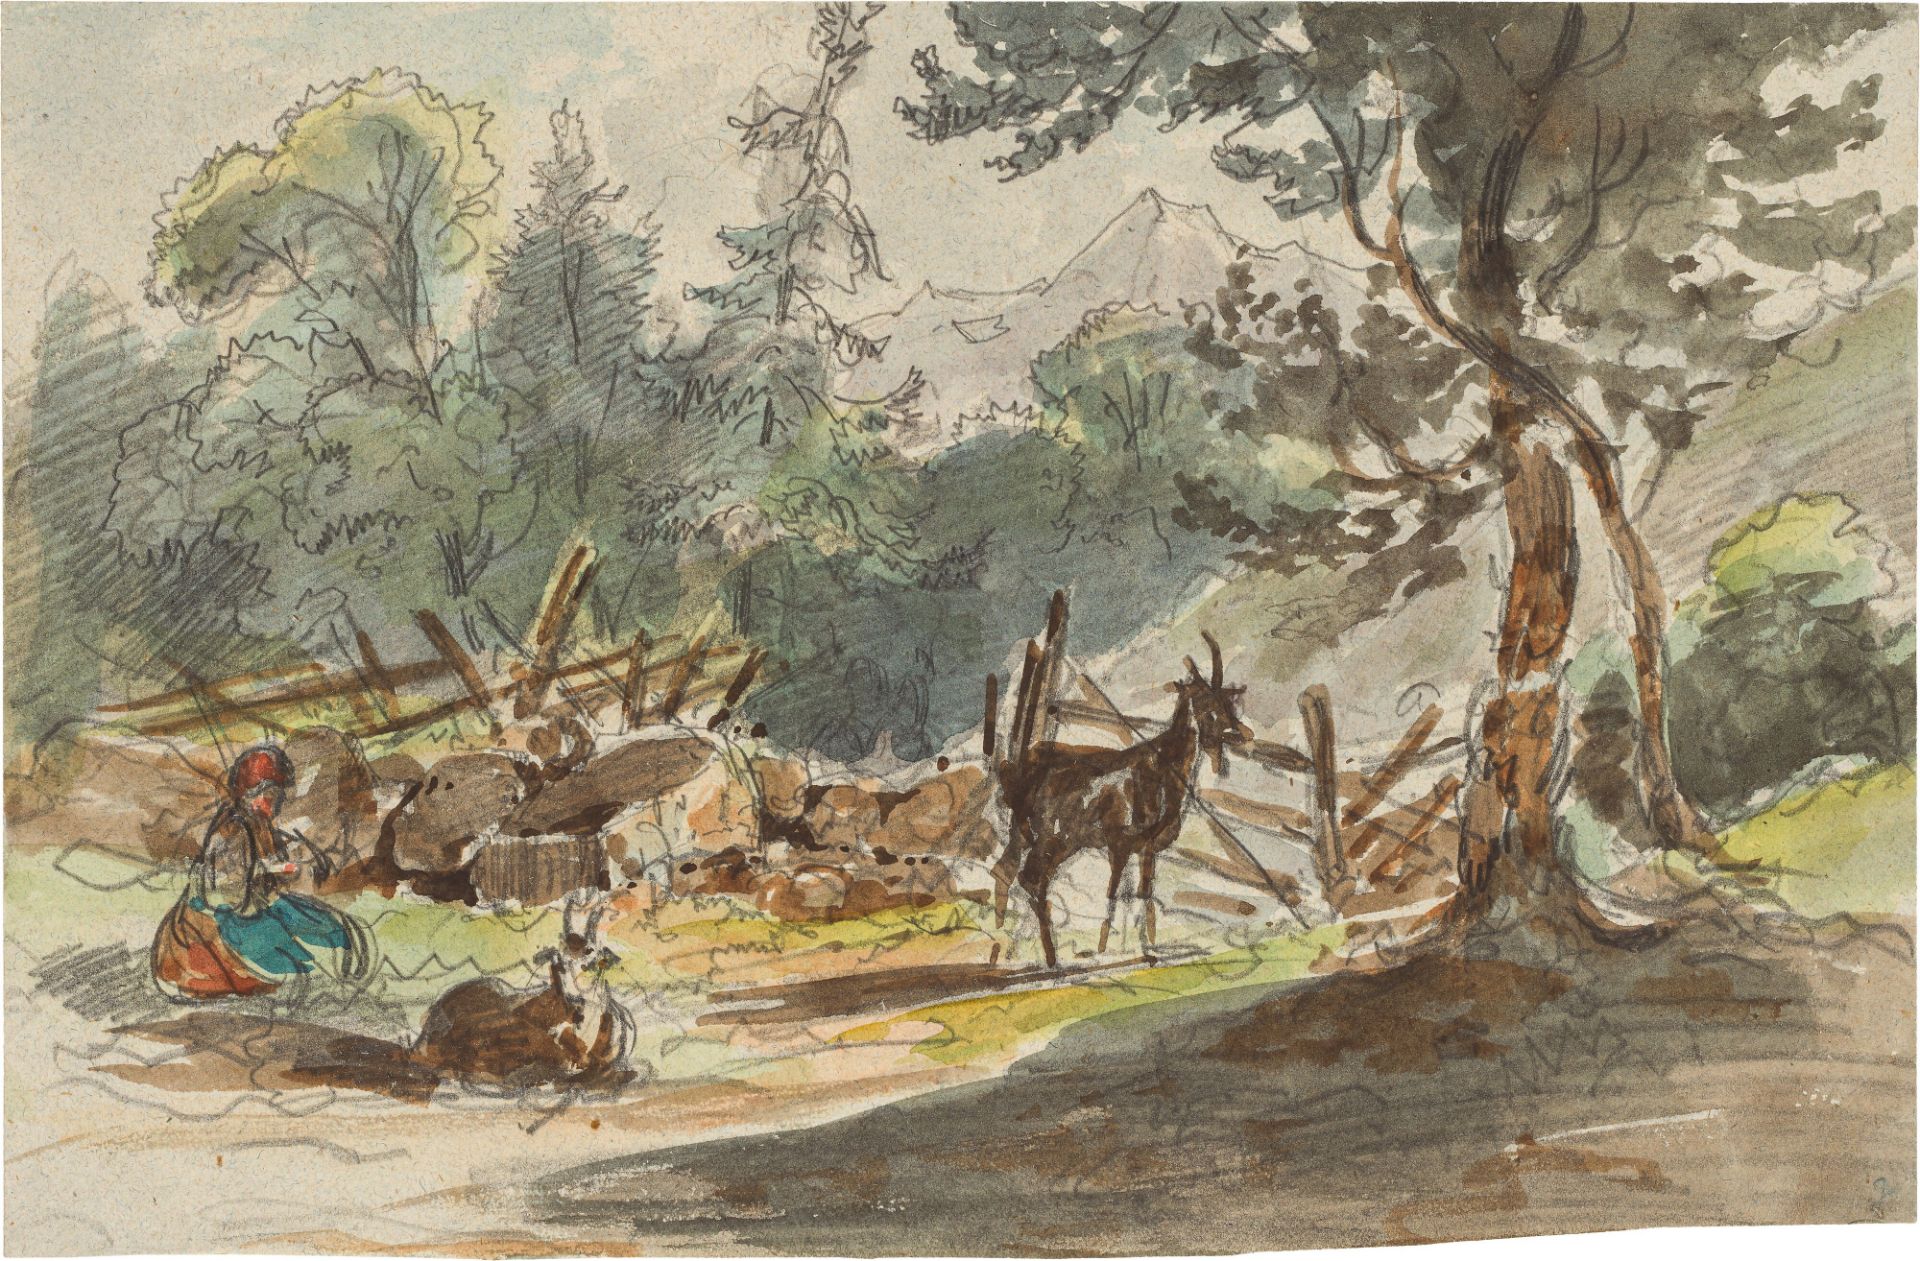 Friedrich GauermannShepherdess with two goatspencil, watercolour on paper; framed13 x 20.5 cmsince - Image 2 of 2